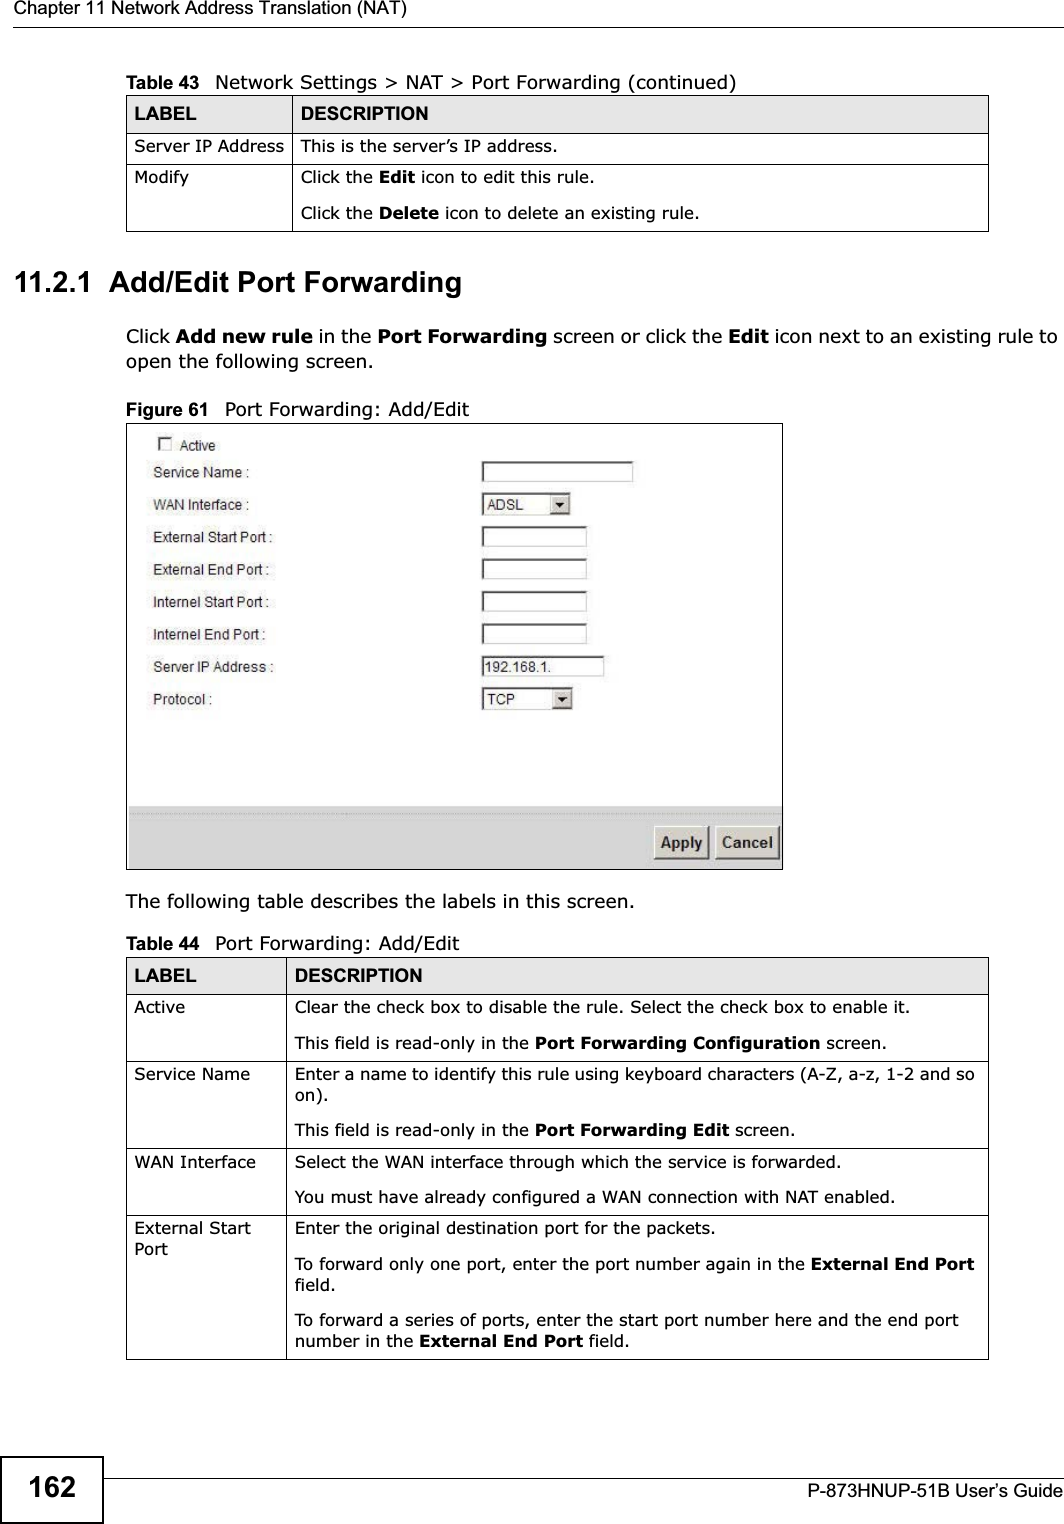 Chapter 11 Network Address Translation (NAT)P-873HNUP-51B User’s Guide16211.2.1  Add/Edit Port Forwarding Click Add new rule in the Port Forwarding screen or click the Edit icon next to an existing rule to open the following screen.Figure 61   Port Forwarding: Add/Edit The following table describes the labels in this screen. Server IP Address This is the server’s IP address.Modify Click the Edit icon to edit this rule.Click the Delete icon to delete an existing rule. Table 43   Network Settings &gt; NAT &gt; Port Forwarding (continued)LABEL DESCRIPTIONTable 44   Port Forwarding: Add/EditLABEL DESCRIPTIONActive Clear the check box to disable the rule. Select the check box to enable it.This field is read-only in the Port Forwarding Configuration screen.Service Name Enter a name to identify this rule using keyboard characters (A-Z, a-z, 1-2 and so on). This field is read-only in the Port Forwarding Edit screen.WAN Interface Select the WAN interface through which the service is forwarded.You must have already configured a WAN connection with NAT enabled.External Start PortEnter the original destination port for the packets.To forward only one port, enter the port number again in the External End Port field. To forward a series of ports, enter the start port number here and the end port number in the External End Port field.